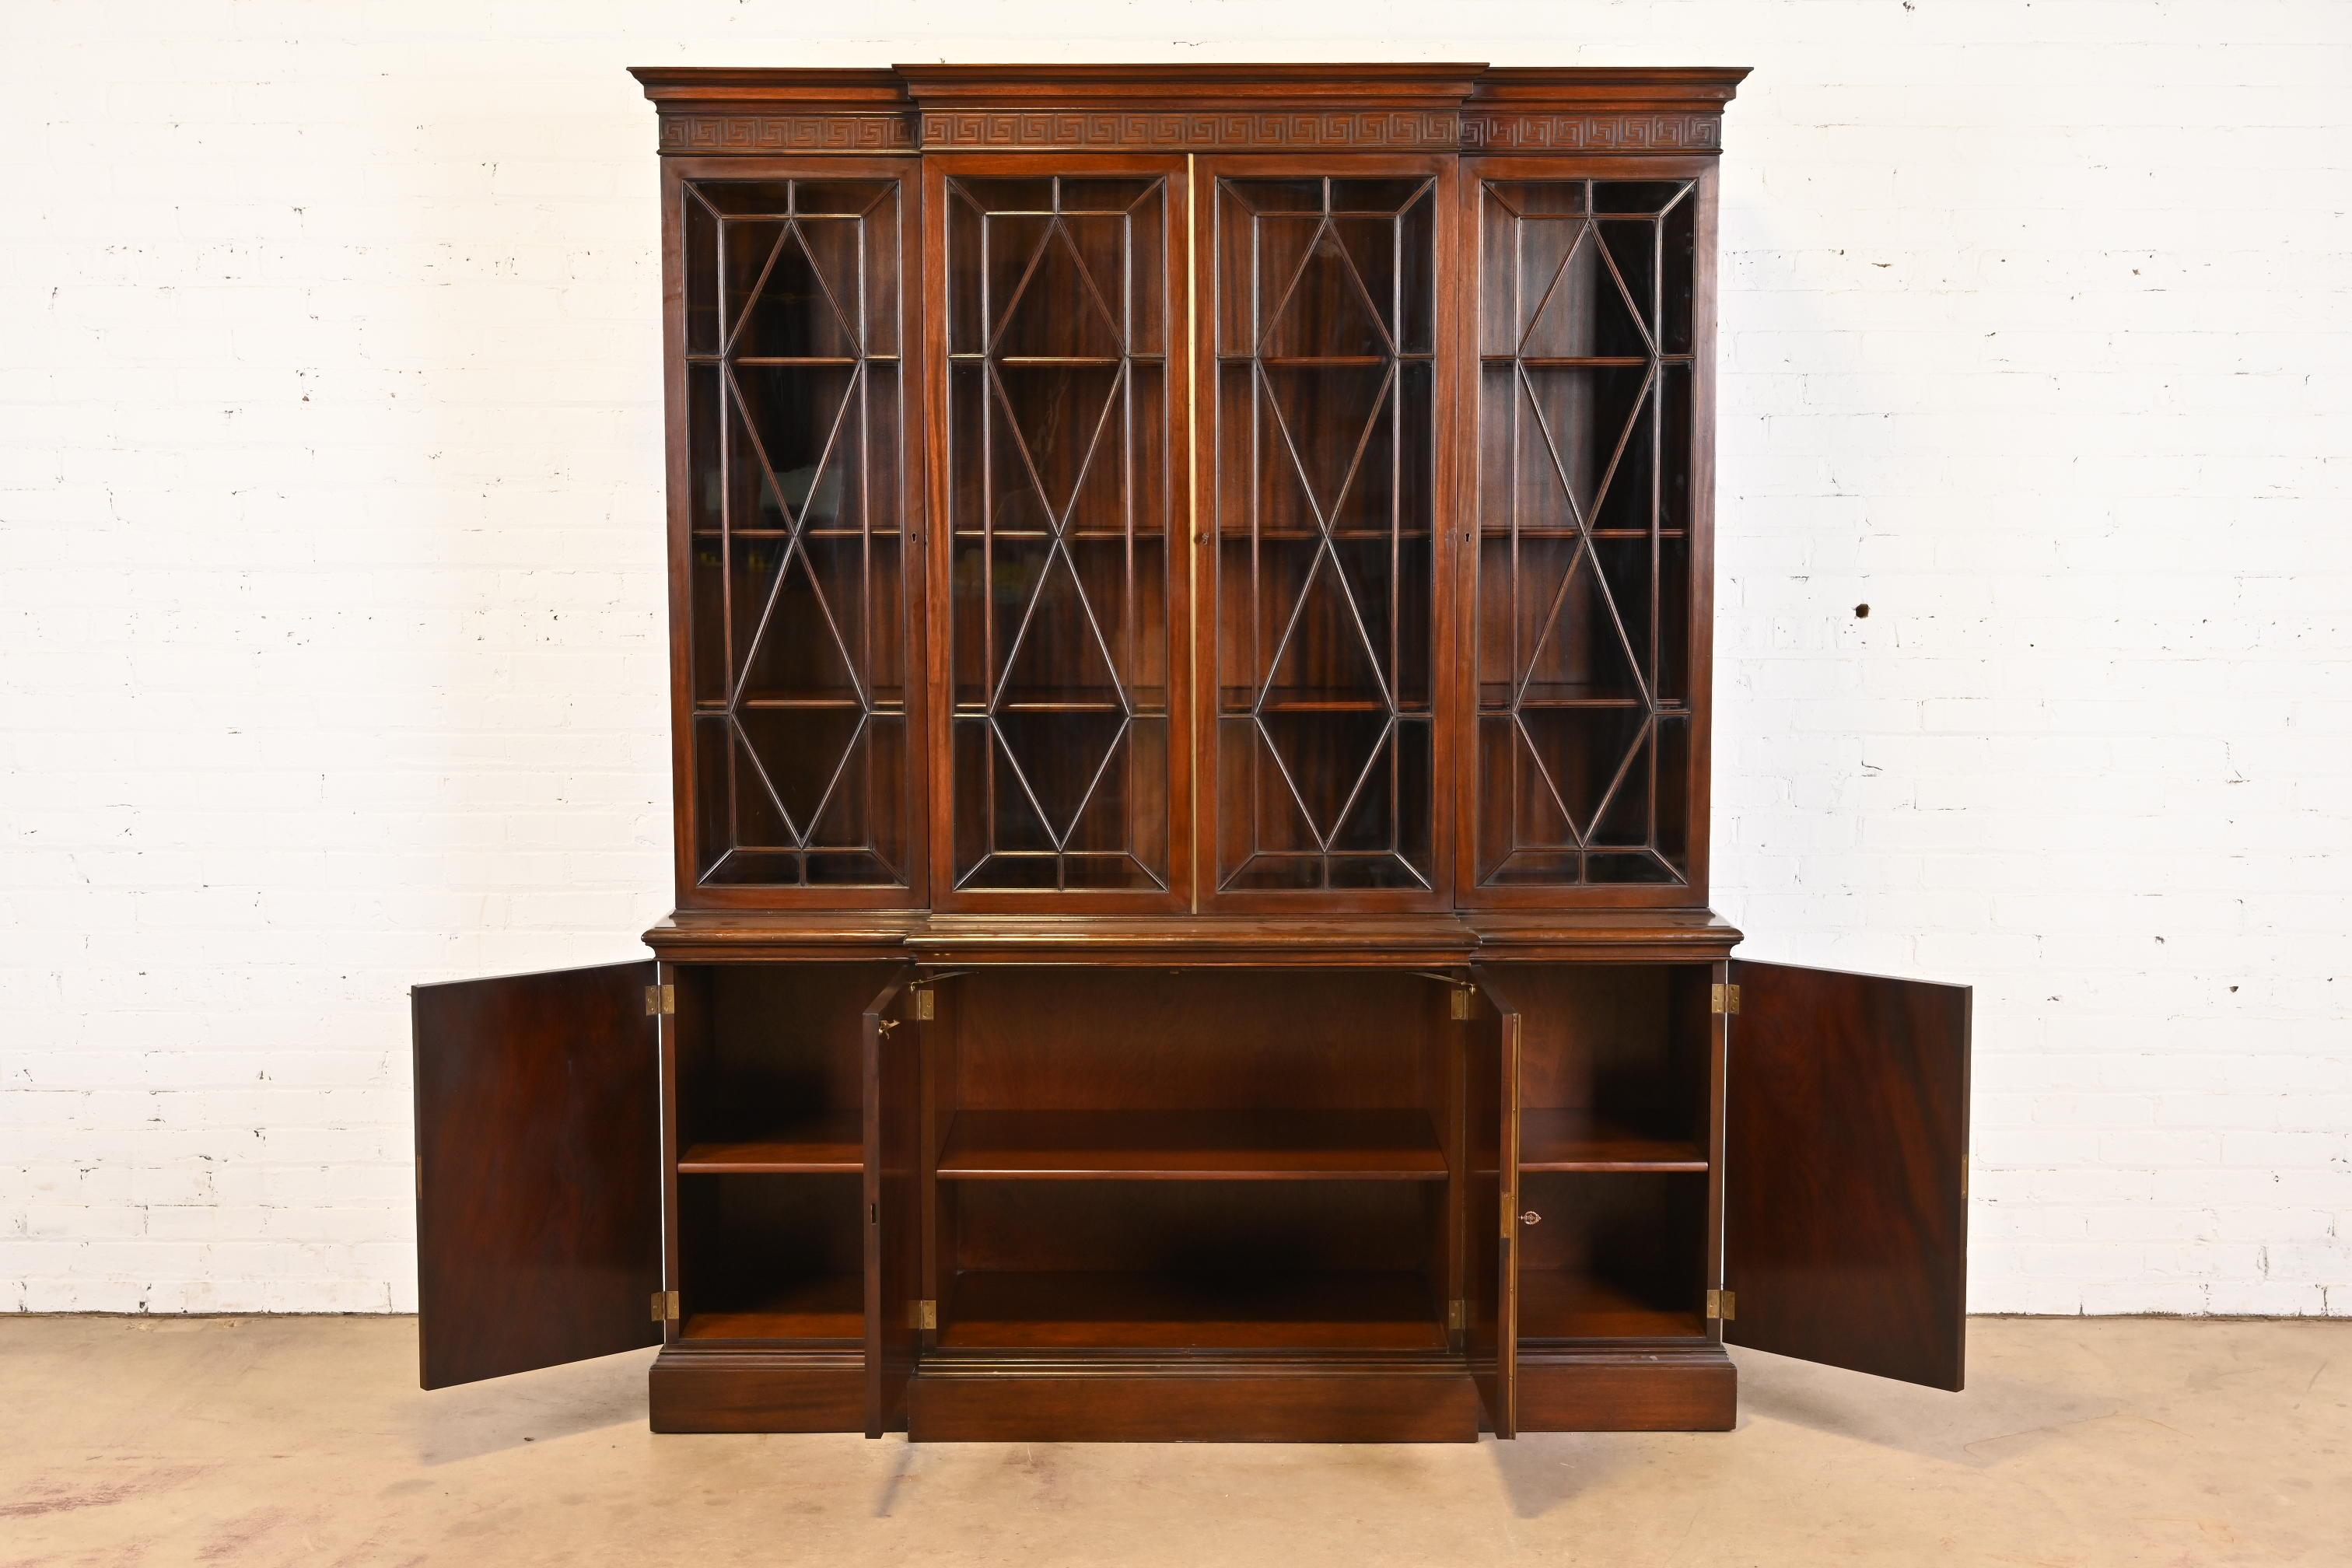 Schmieg & Kotzian Georgian Carved Mahogany Breakfront Bookcase Cabinet, 1940s For Sale 1